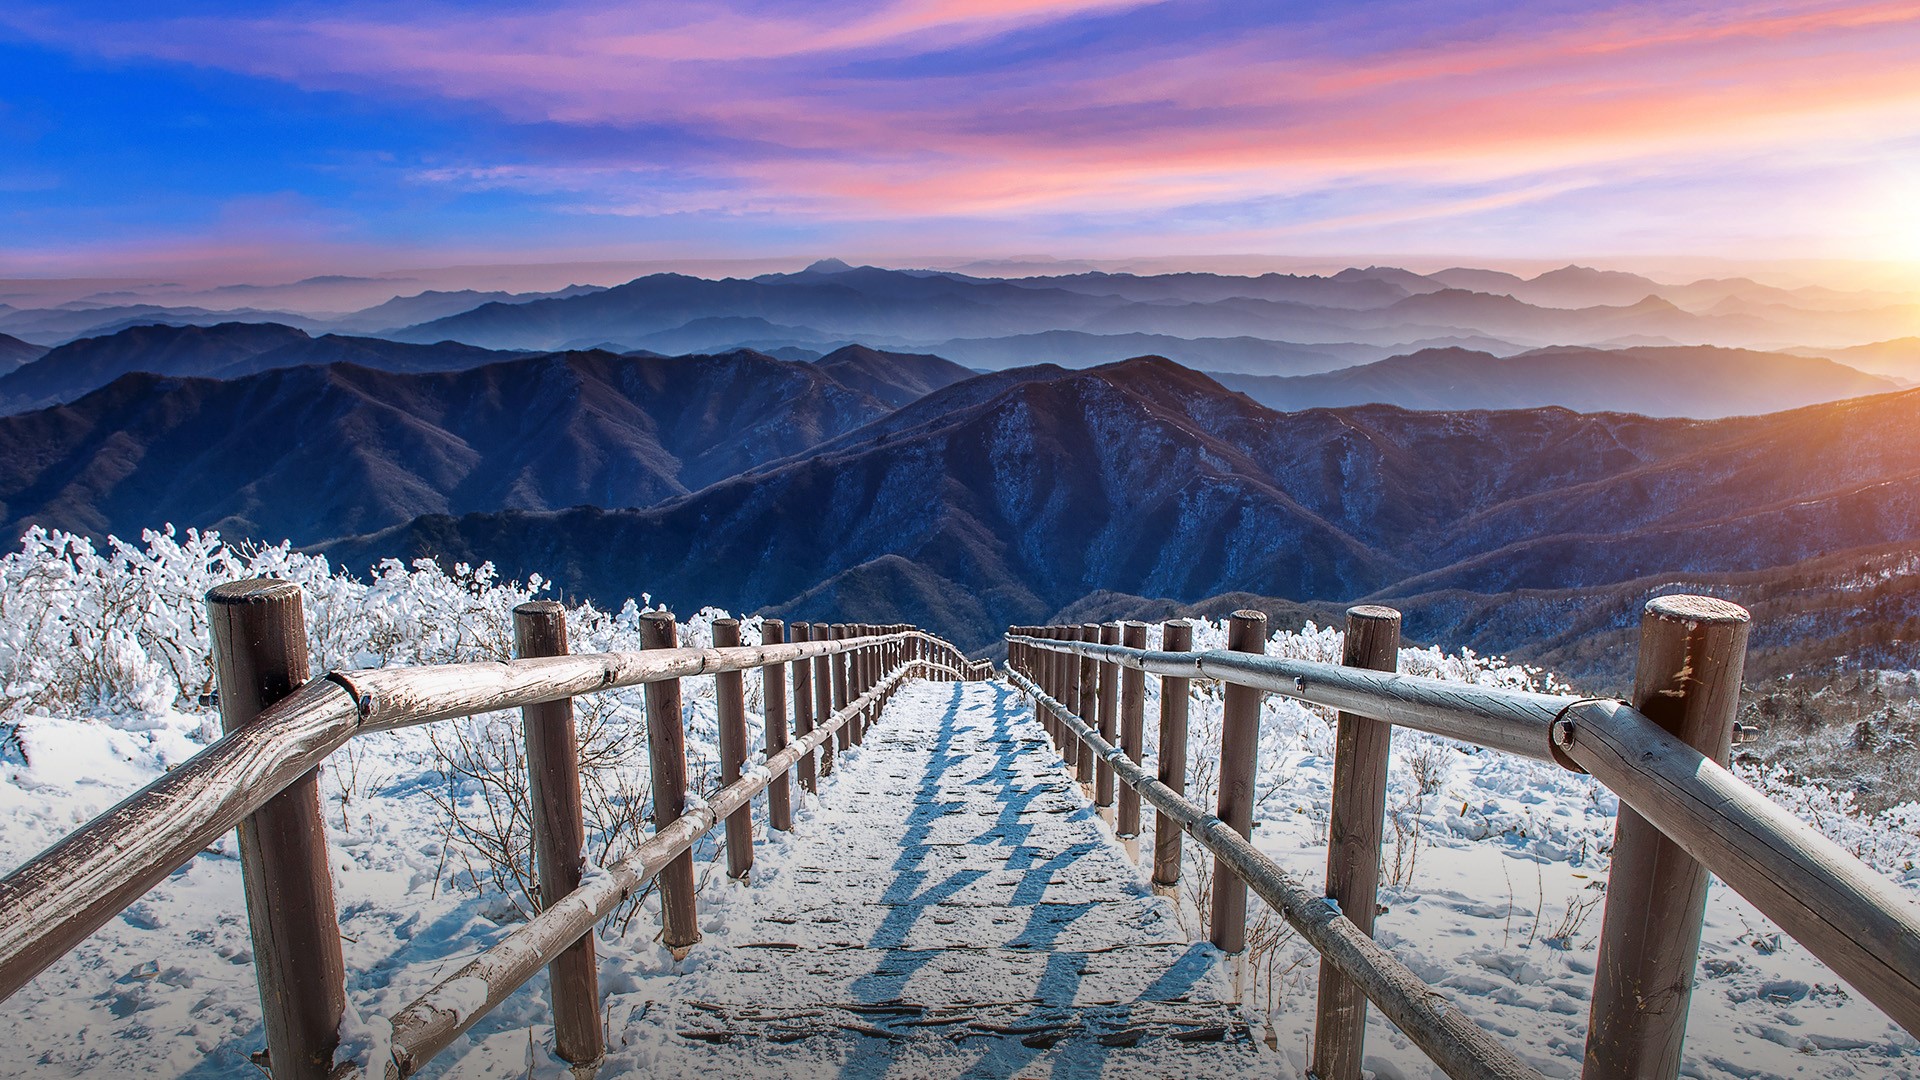 Staircase on Deogyusan mountains covered with snow in winter at sunrise, South Korea. Windows 10 Spotlight Image